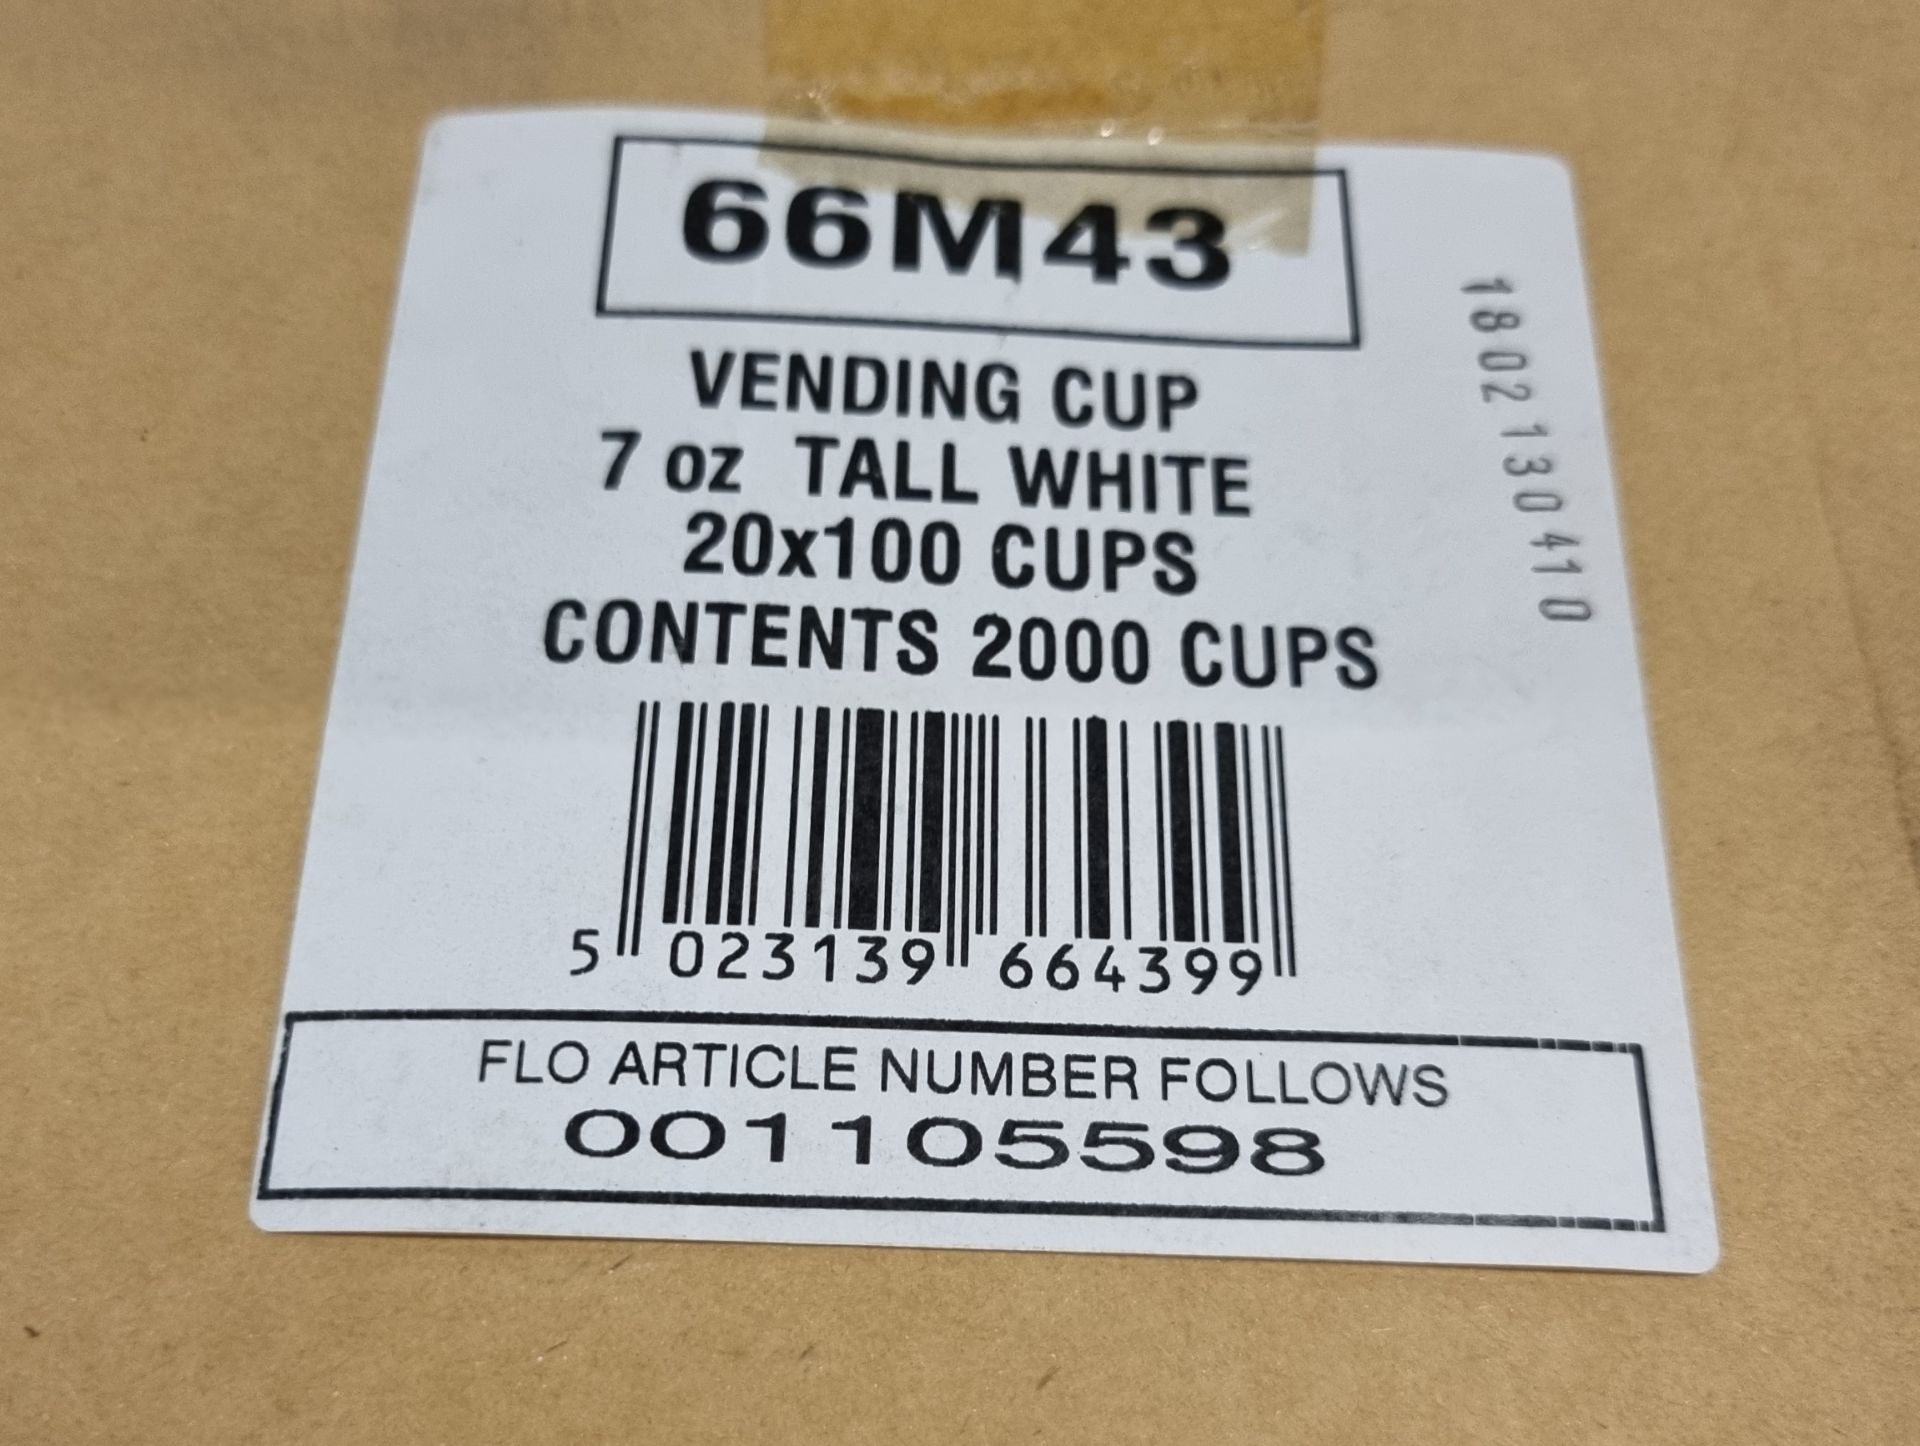 12x boxes of 7 zo tall white vending cups - 20x100 cups per box - Image 5 of 5